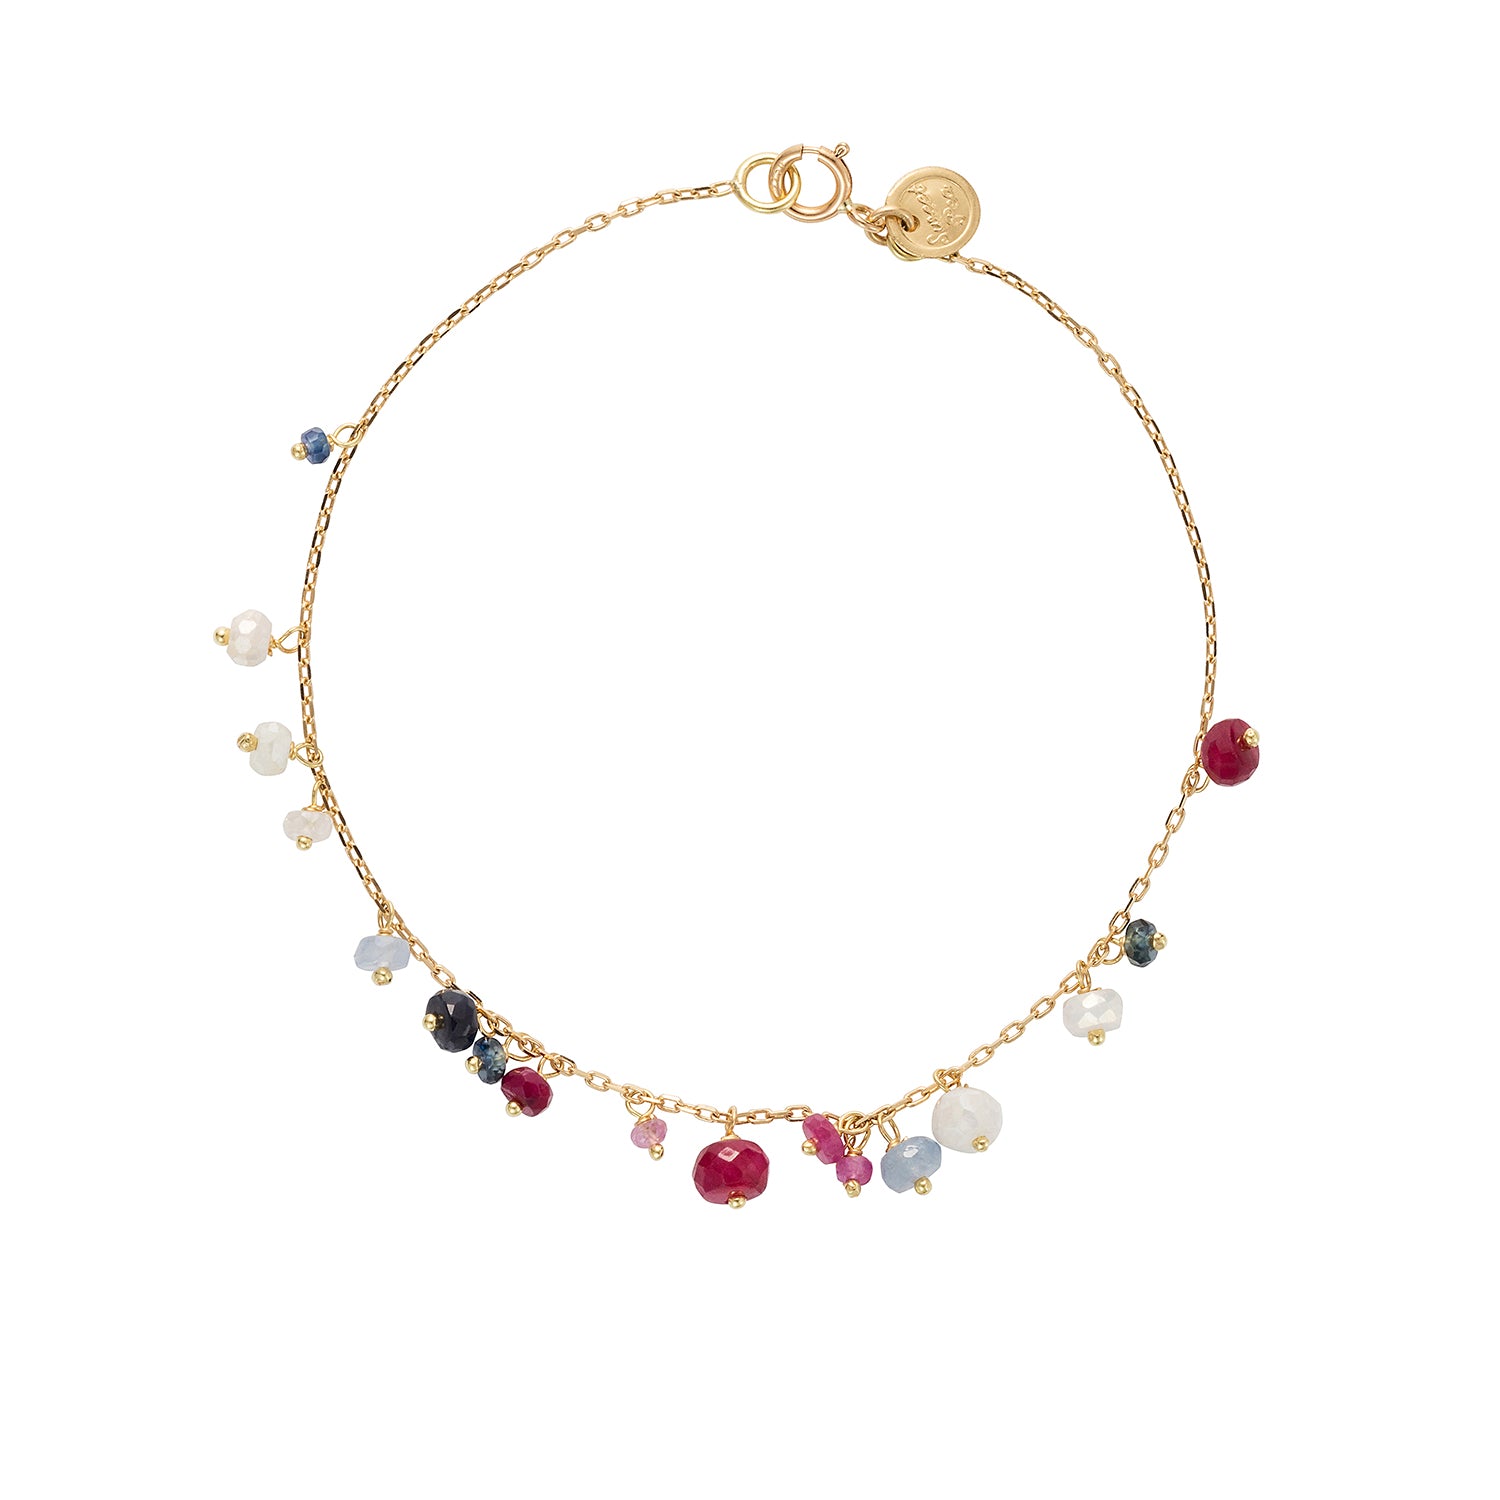 18ct yellow gold chain Pogo Punk beaded bracelet with ruby, sapphire and corundum beads.